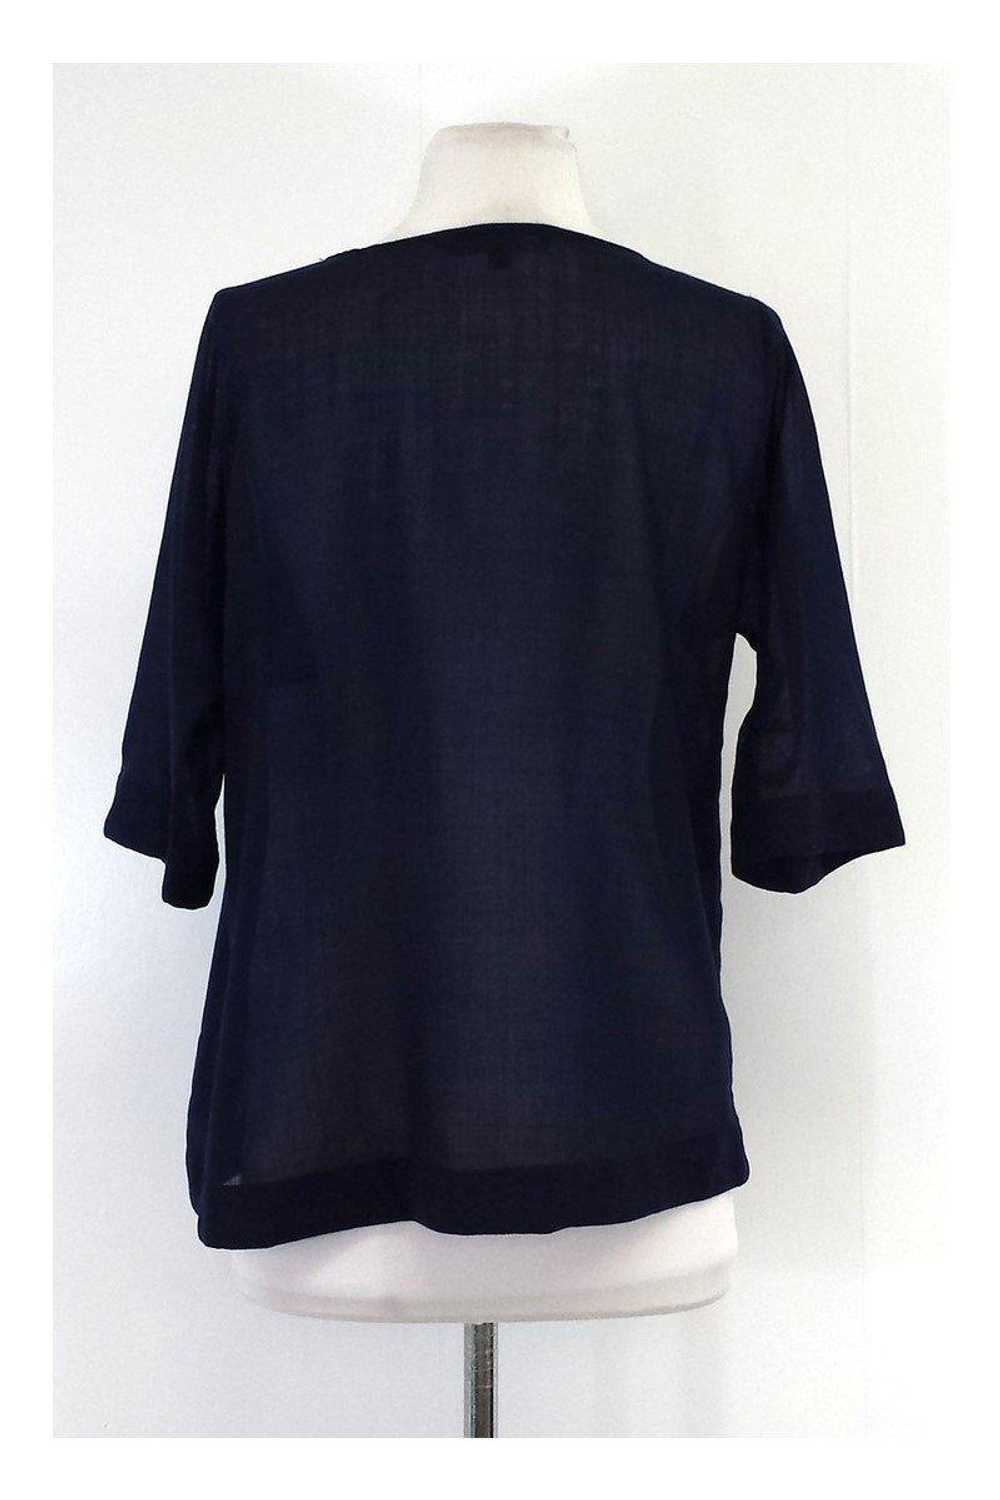 Marc by Marc Jacobs - Navy Open Shirt Sz 2 - image 3